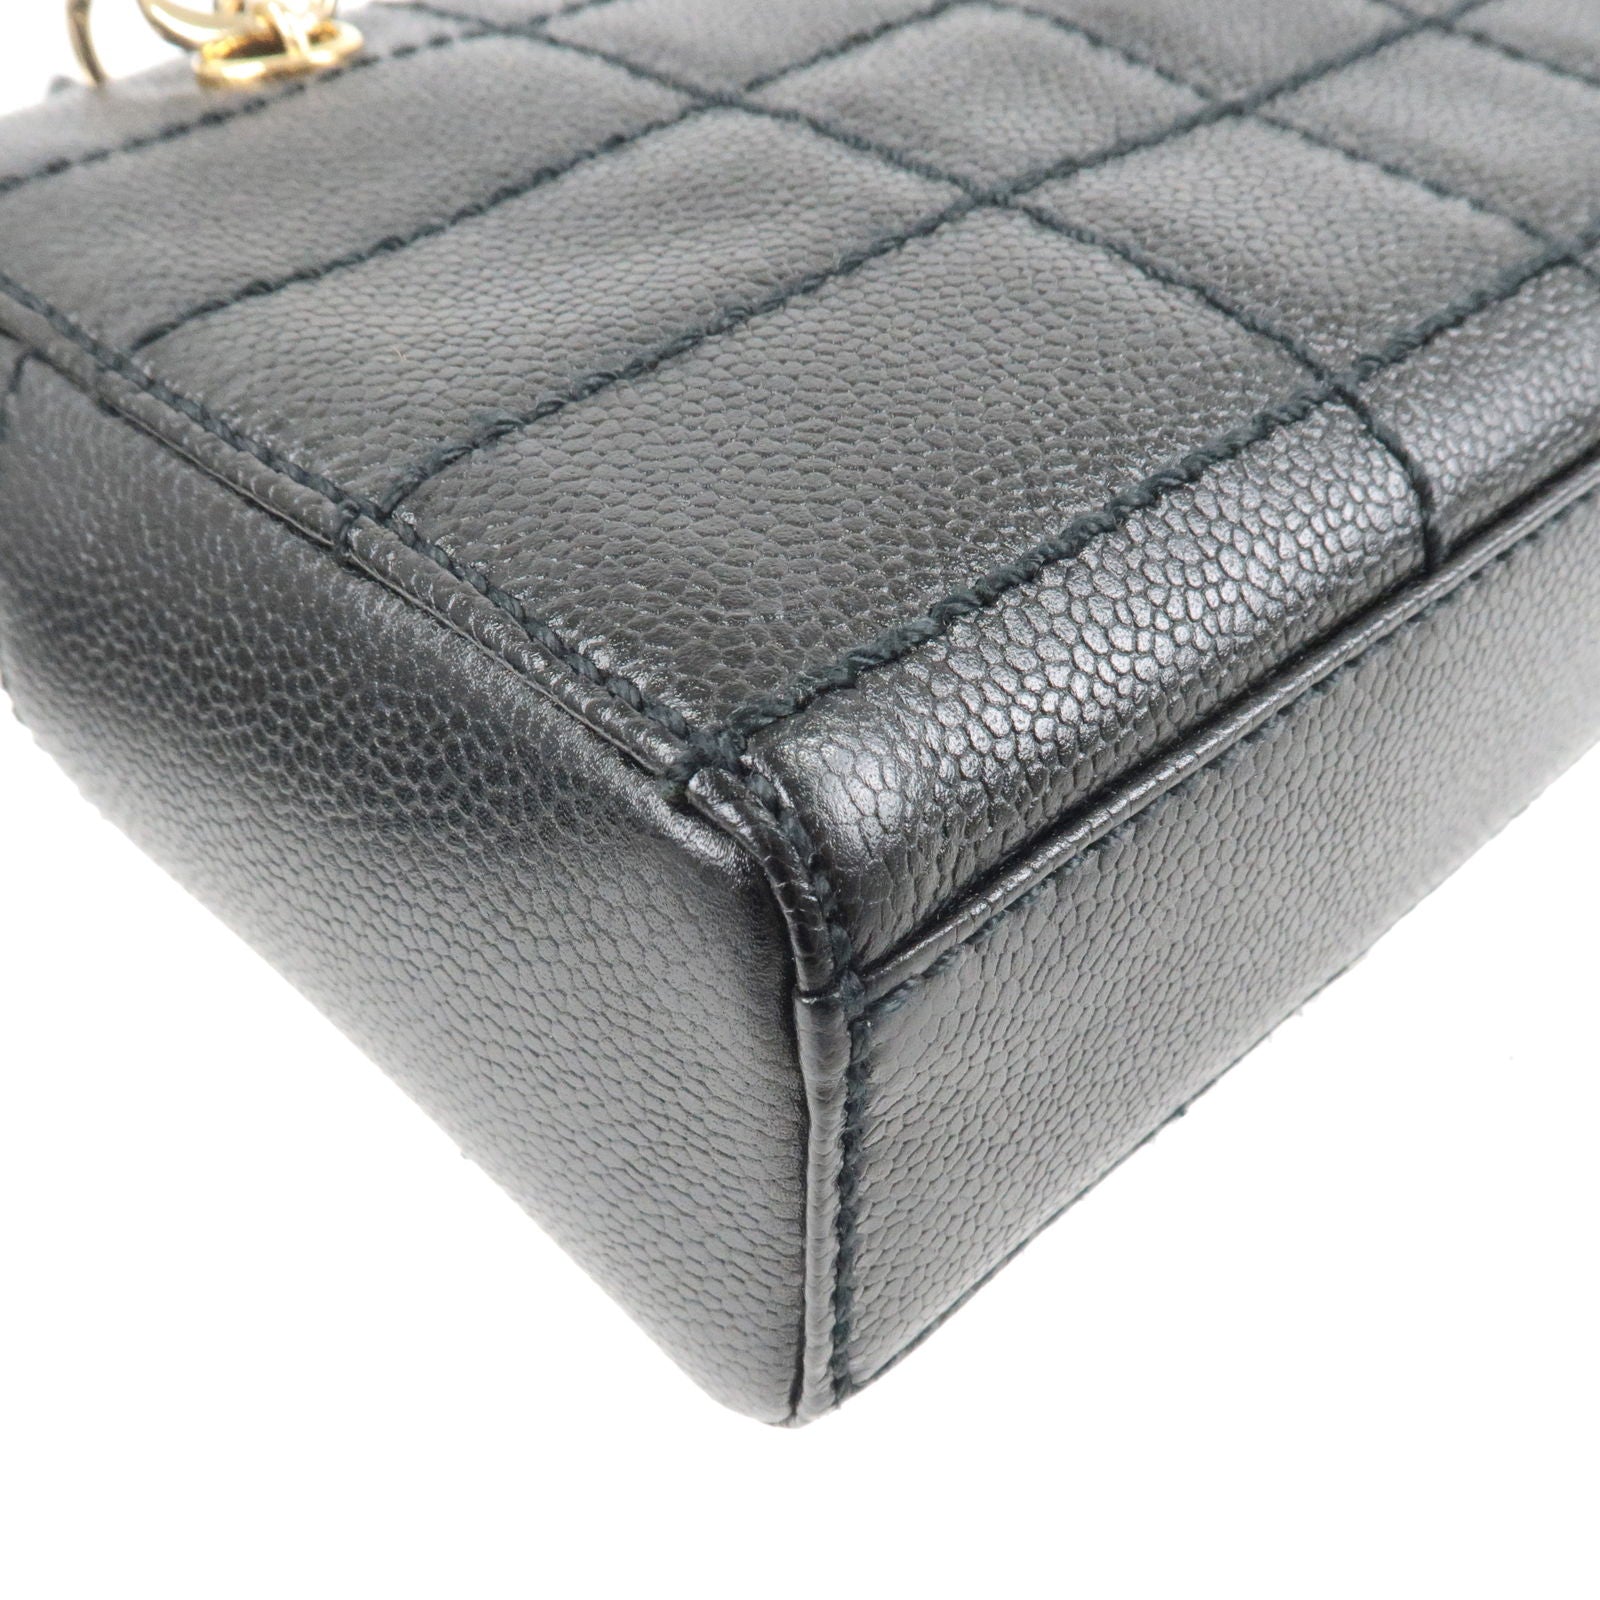 Chanel Large Quilted Tote - Bar - Skin - Caviar - Chain - ep_vintage luxury  Store - Black – dct - CHANEL - Shoulder - Bag - Chocolate